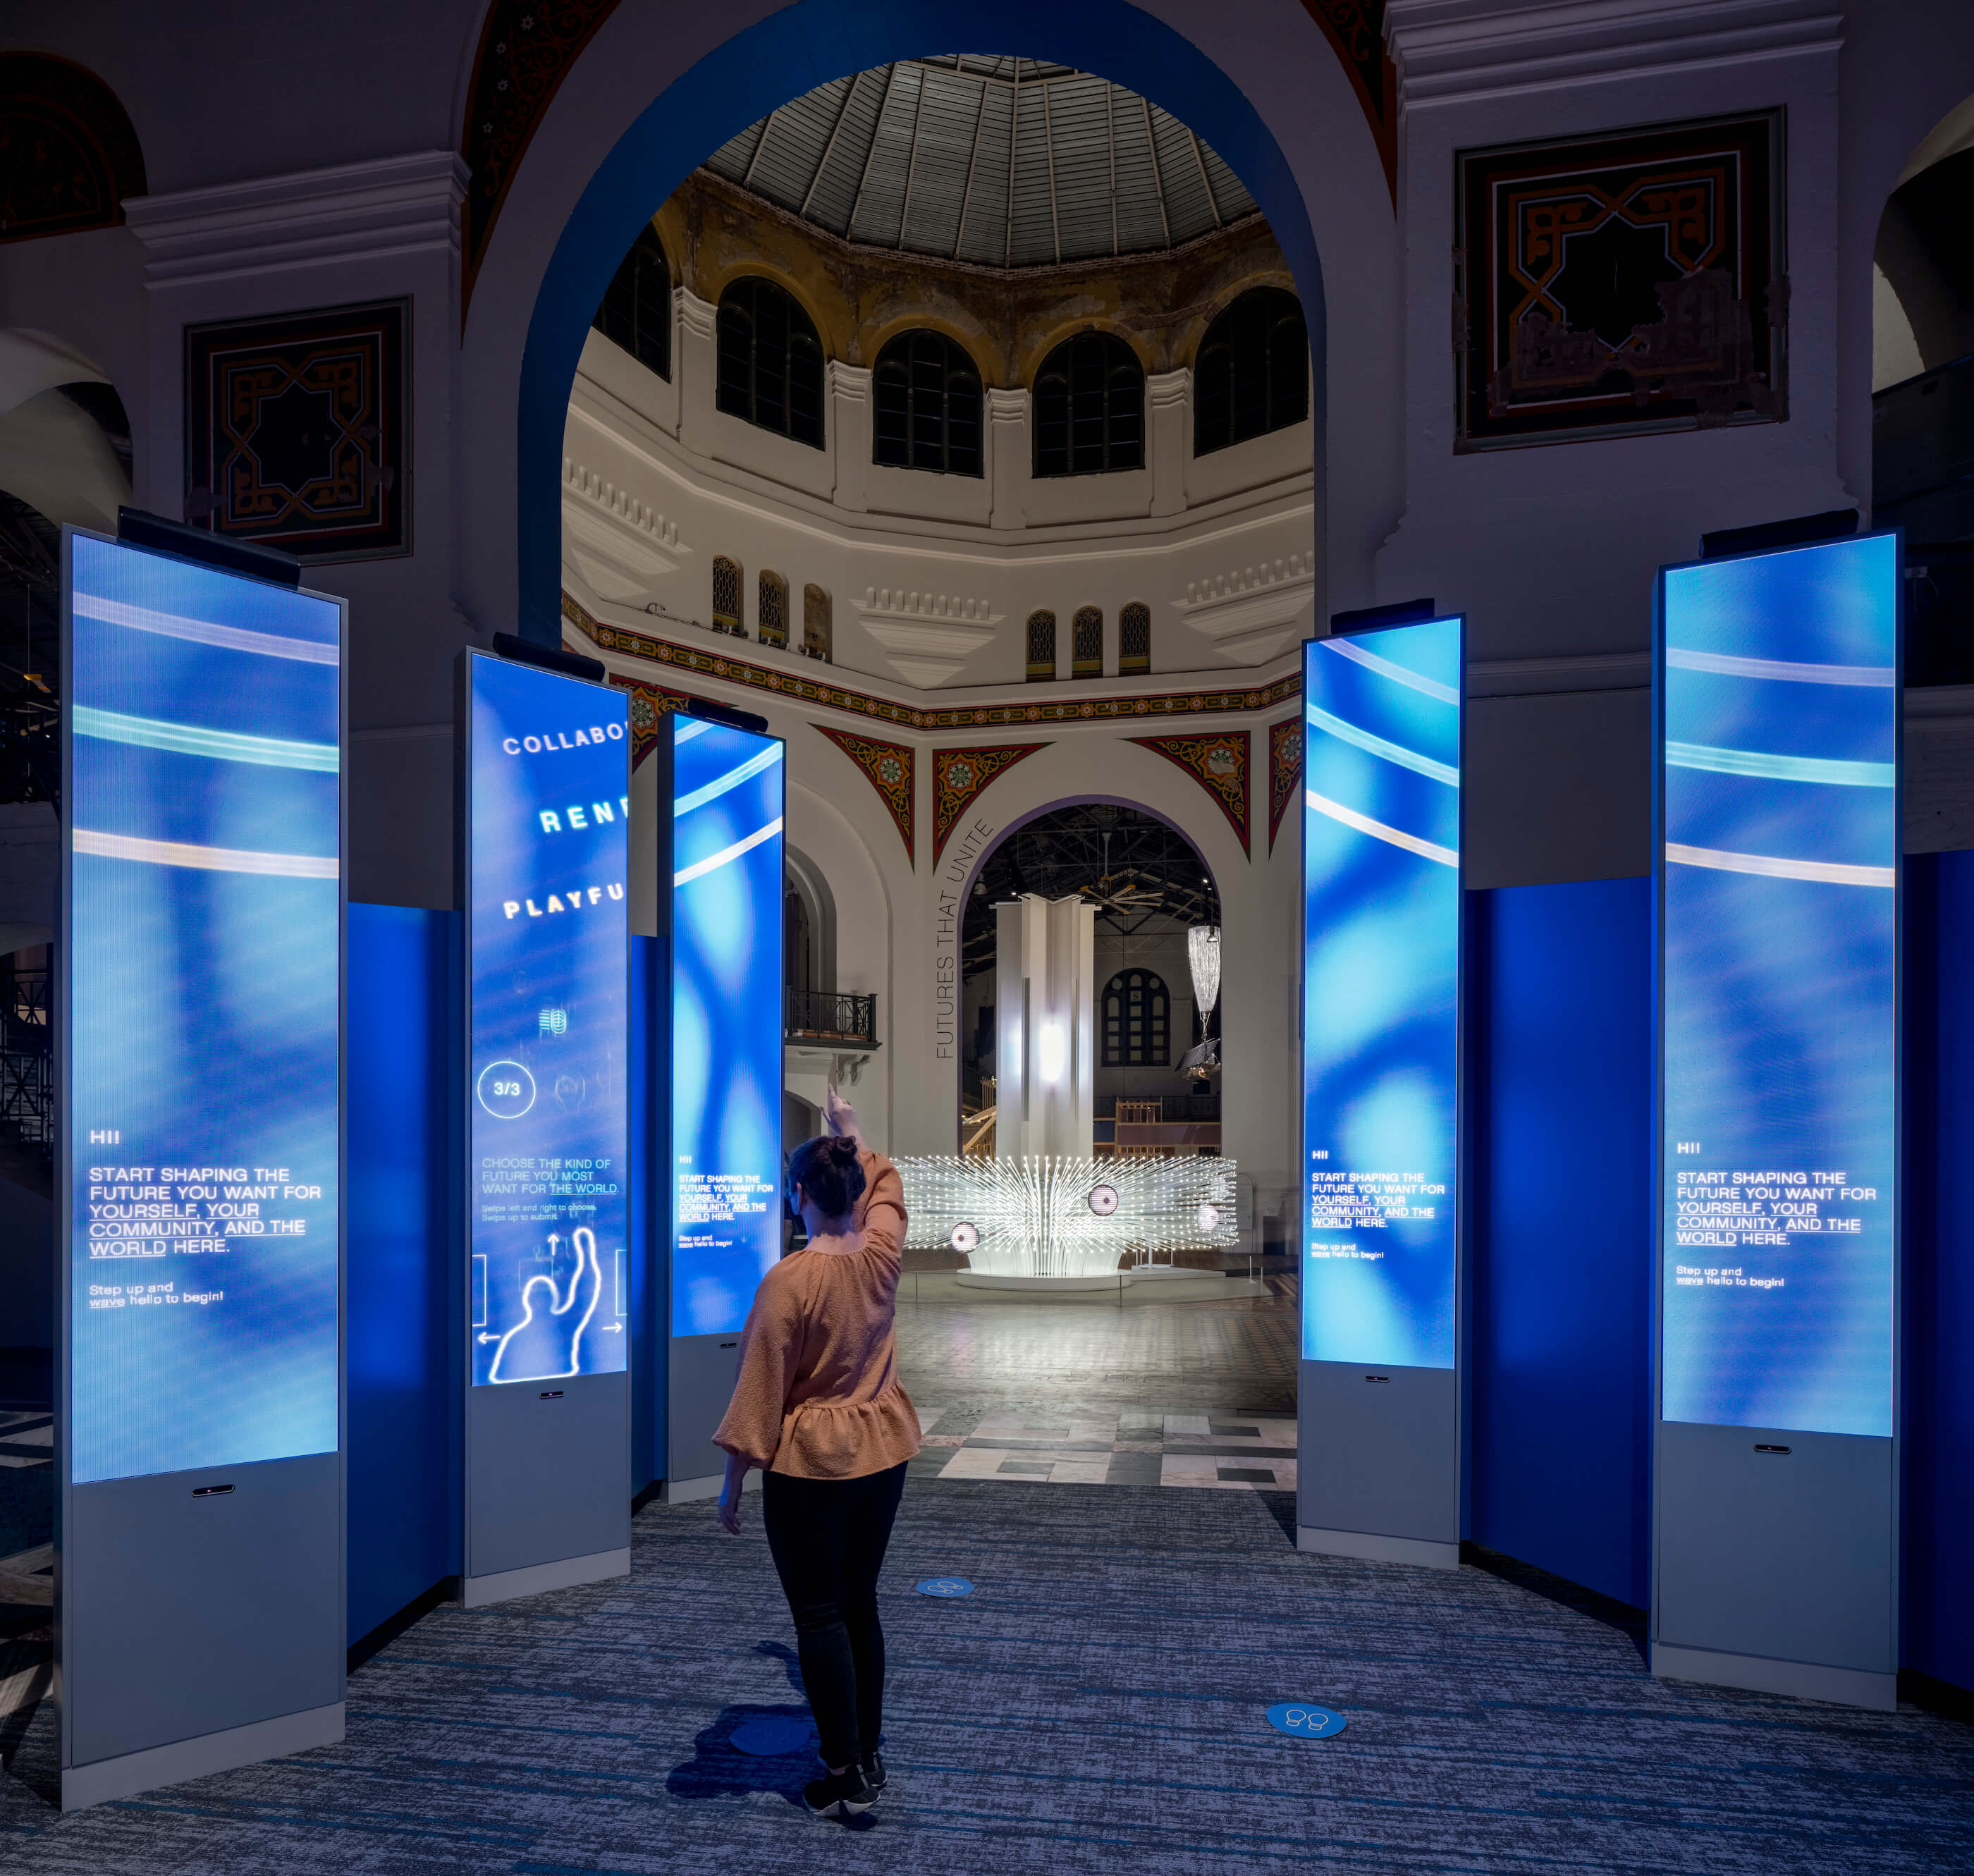 installation view of a major smithsonian exhibition about the future with interactive display screens